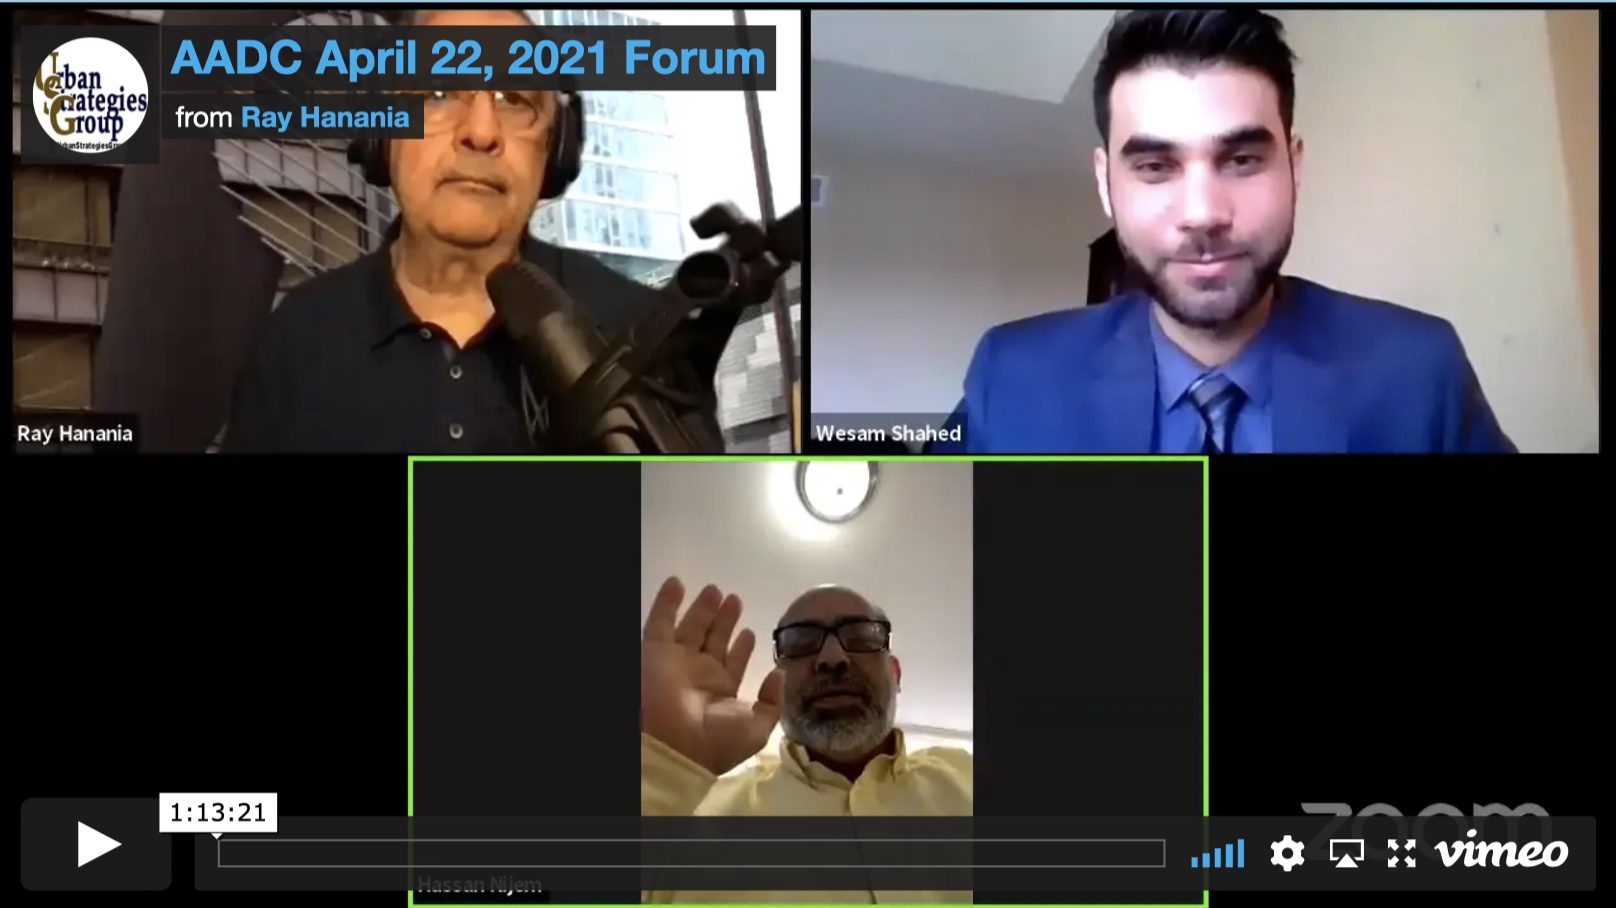 April 22, 2021 Zoom forum analyzing the April 6, 2021 election results